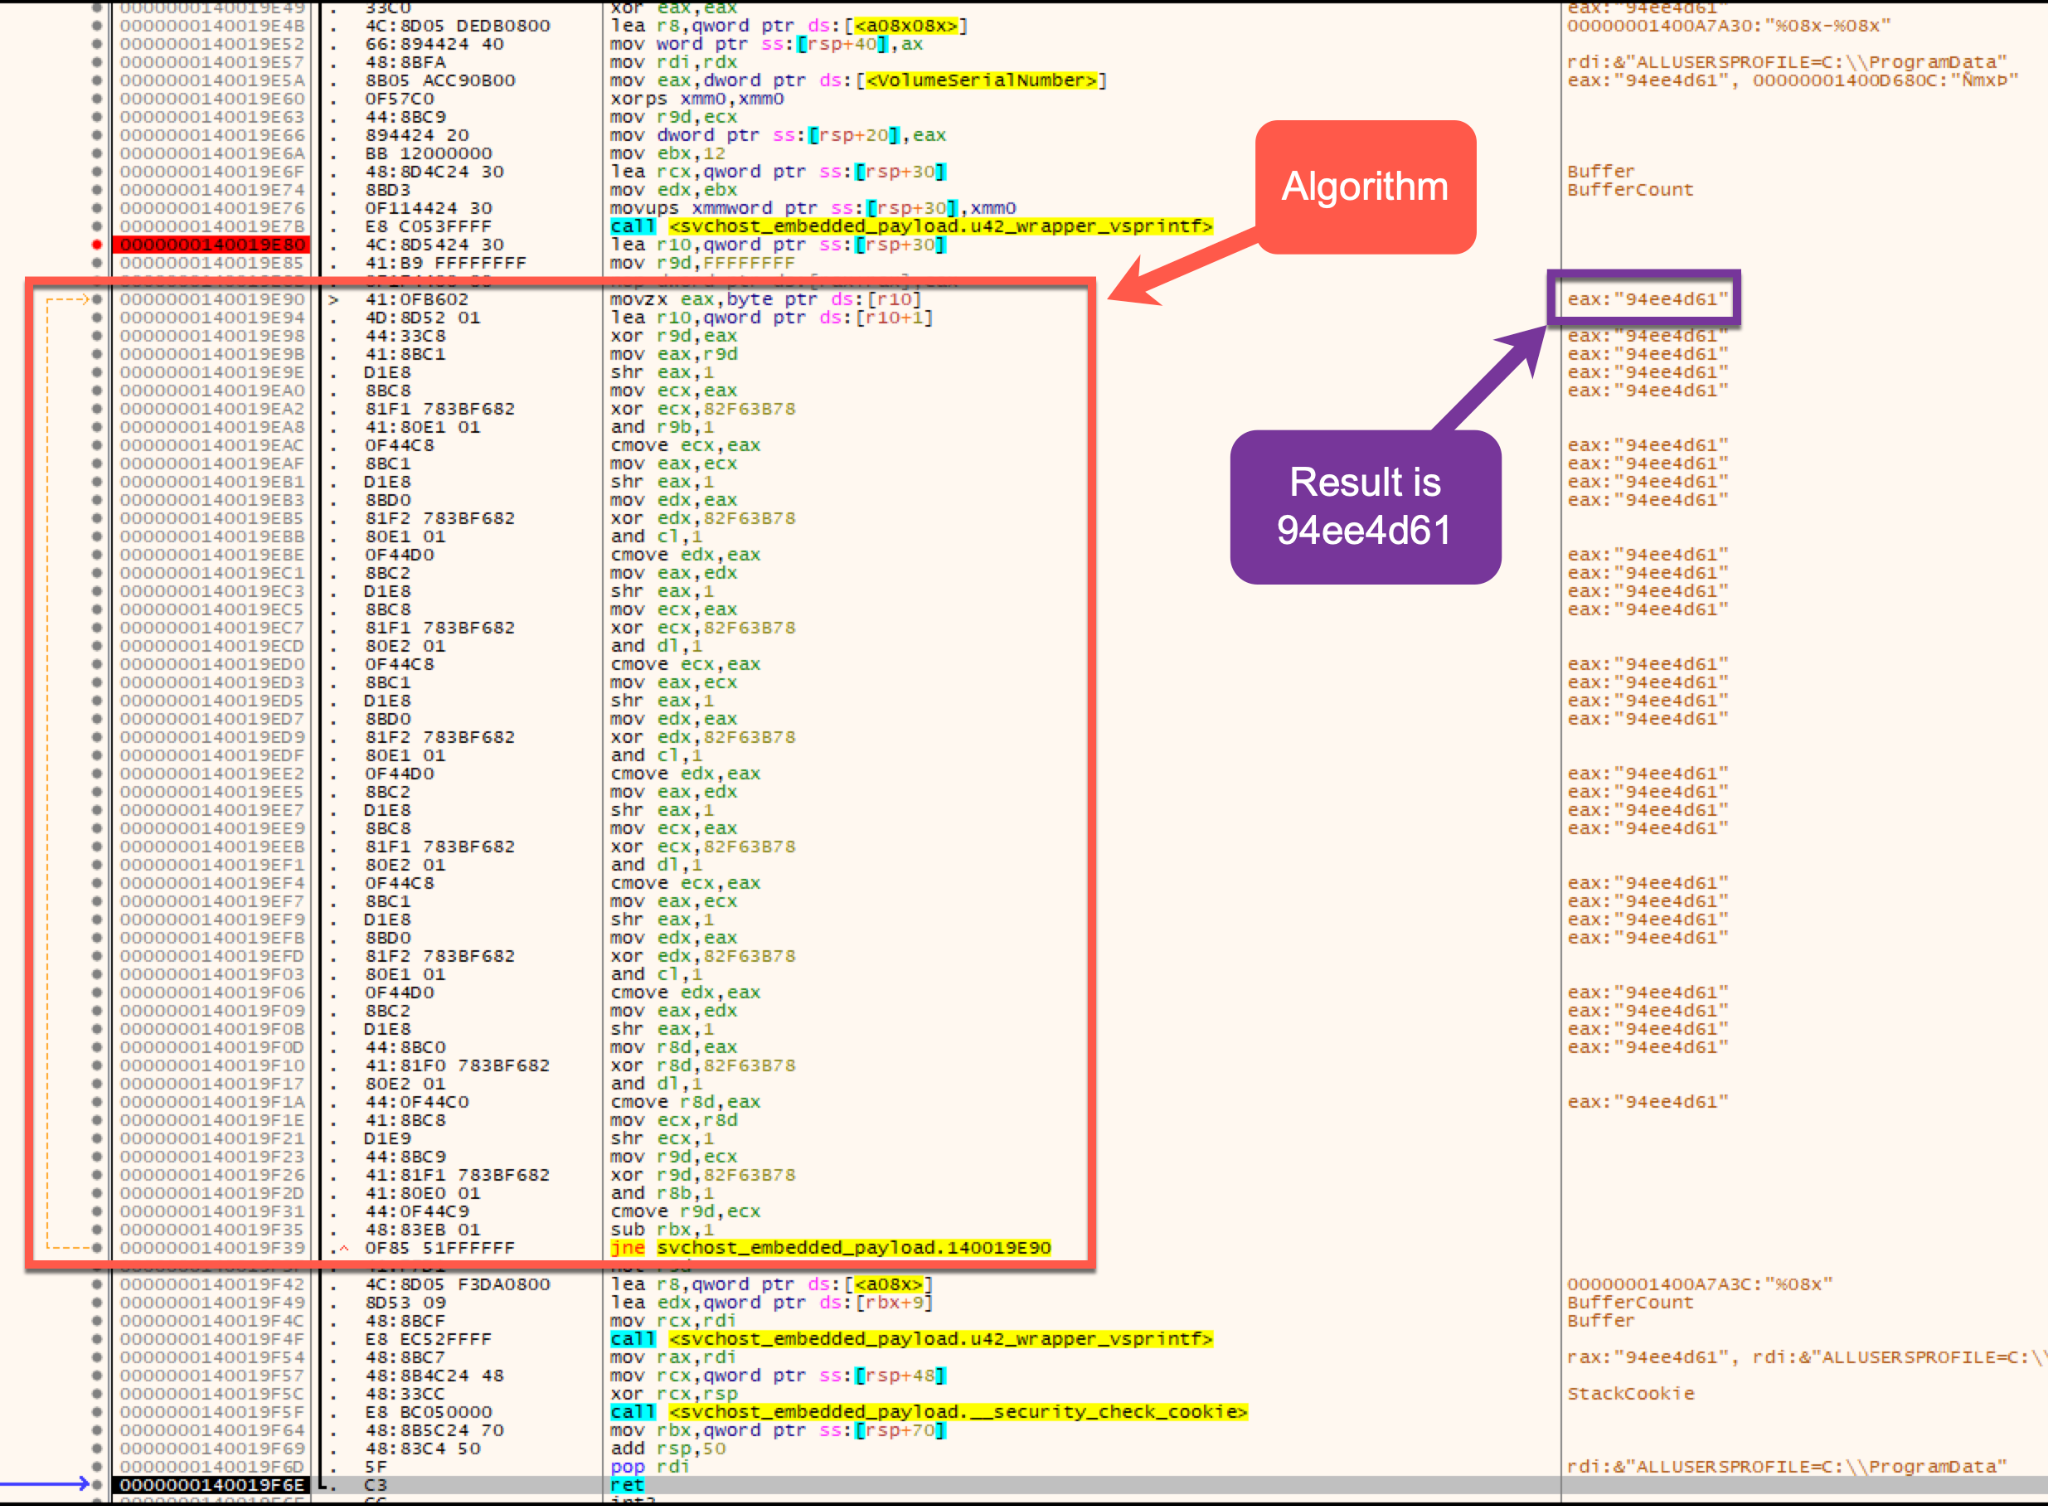 Image 19 is a screenshot of many lines of code in two panes. In the left pane highlighted in red is the algorithm. Highlighted in purple on the right is the result, which is 94ee4d61. 